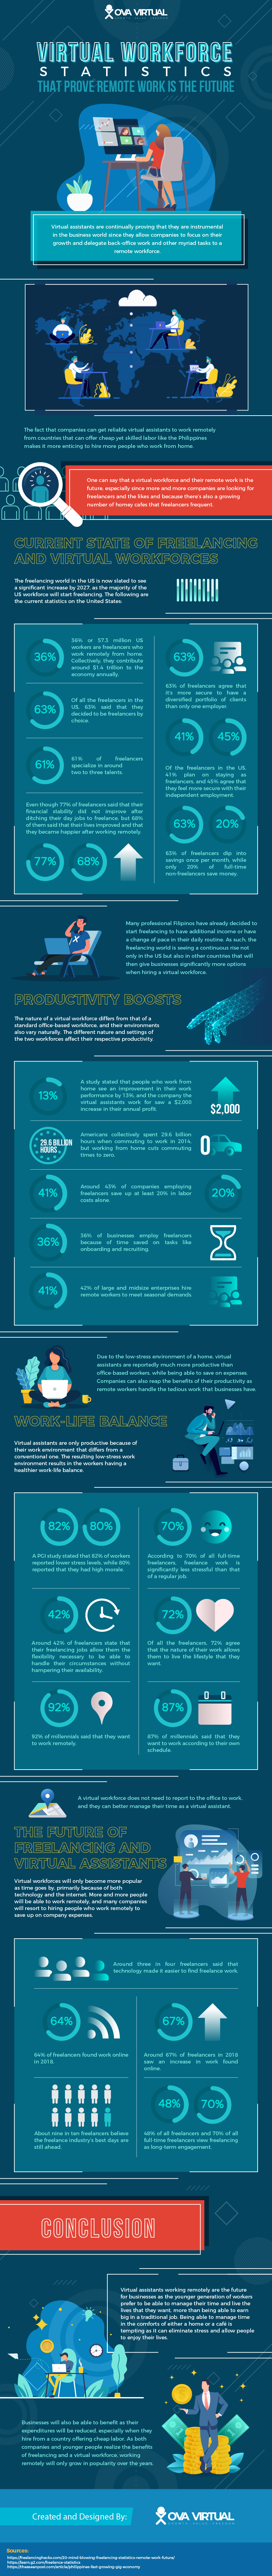 Virtual Workforce Statistics That Prove Remote Work Is The Future #infographic